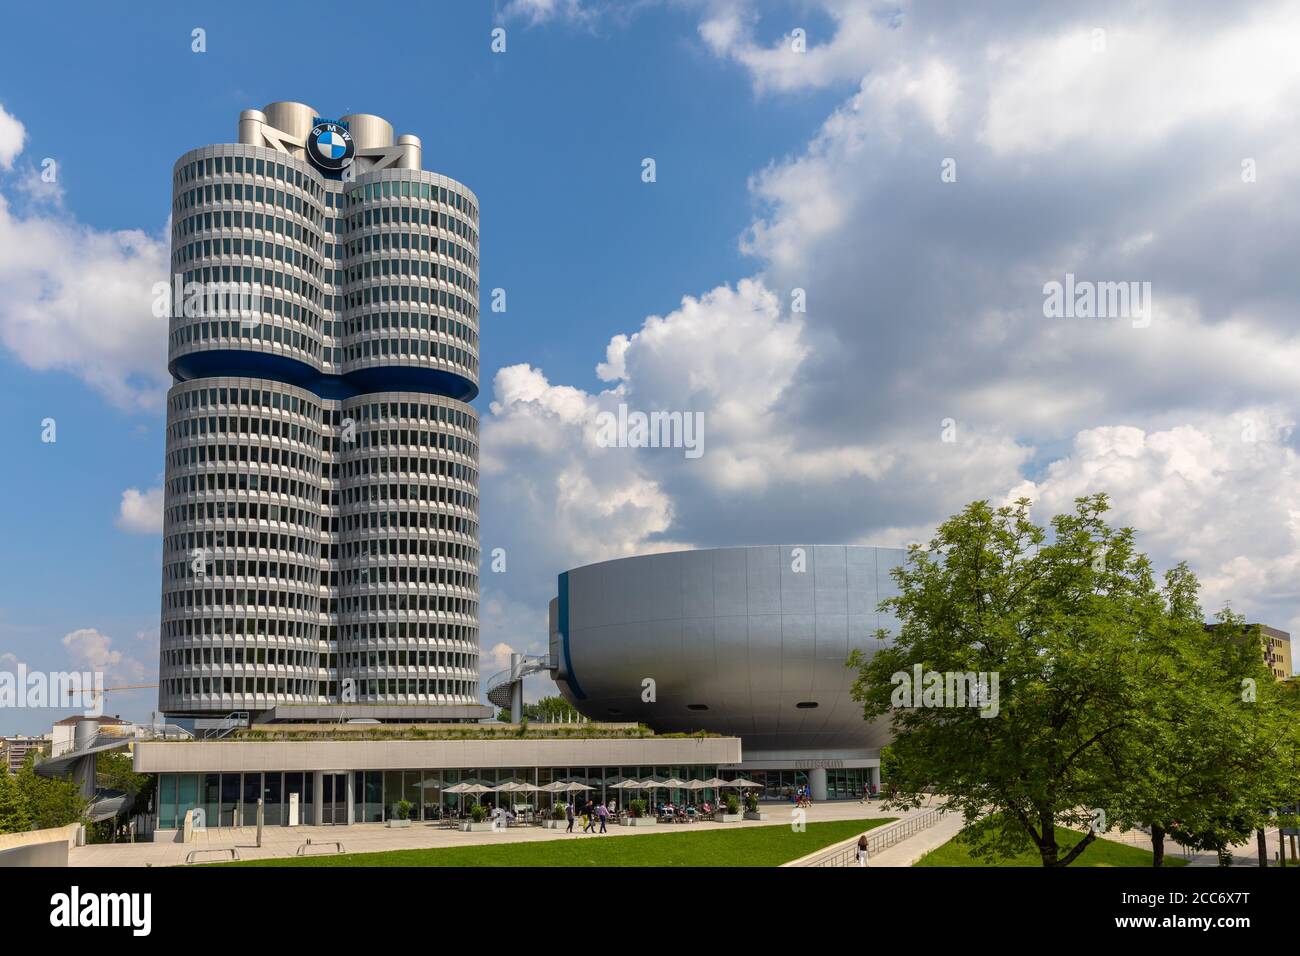 Munich, Germany - June 9, 2018 - Exterior view of the office building and the museum of BMW (Bayerische Motoren Werke),  a famous automobile and motor Stock Photo